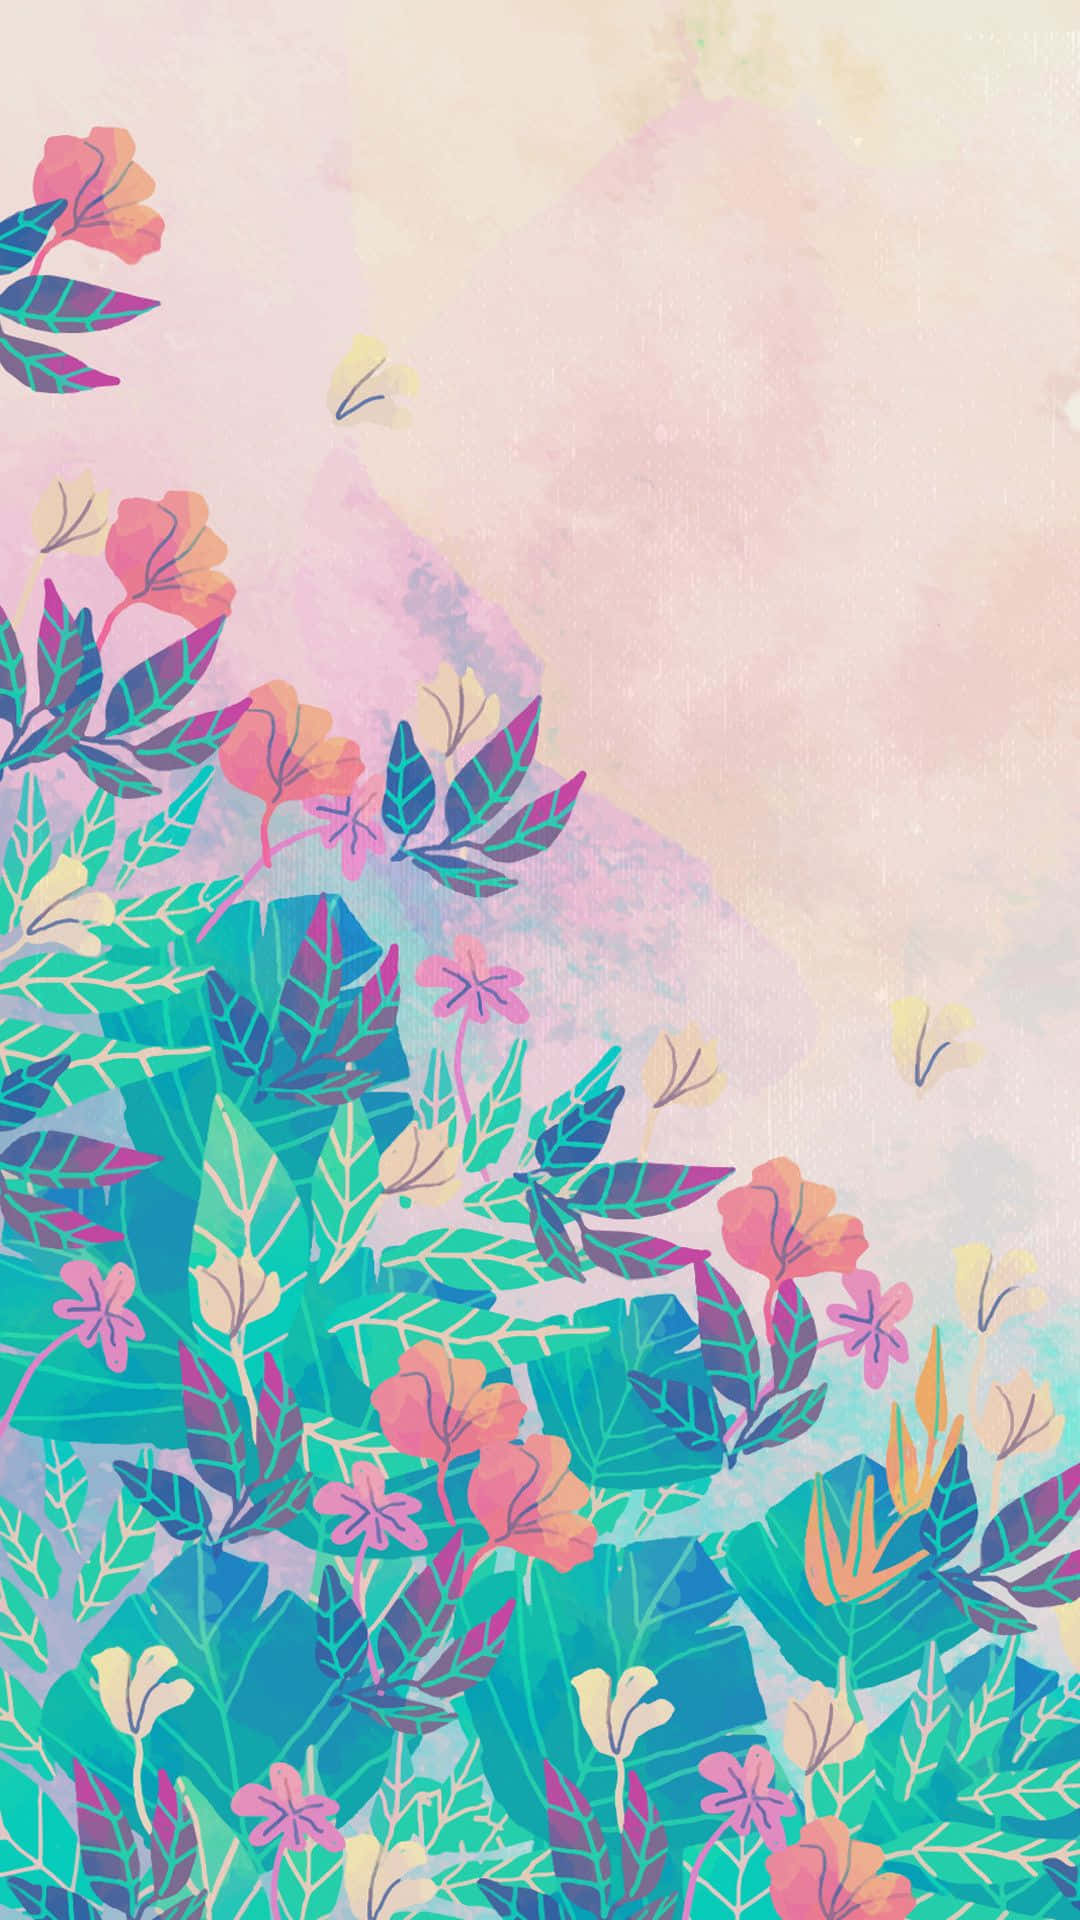 Captivating Watercolor Painting on an iPhone Wallpaper